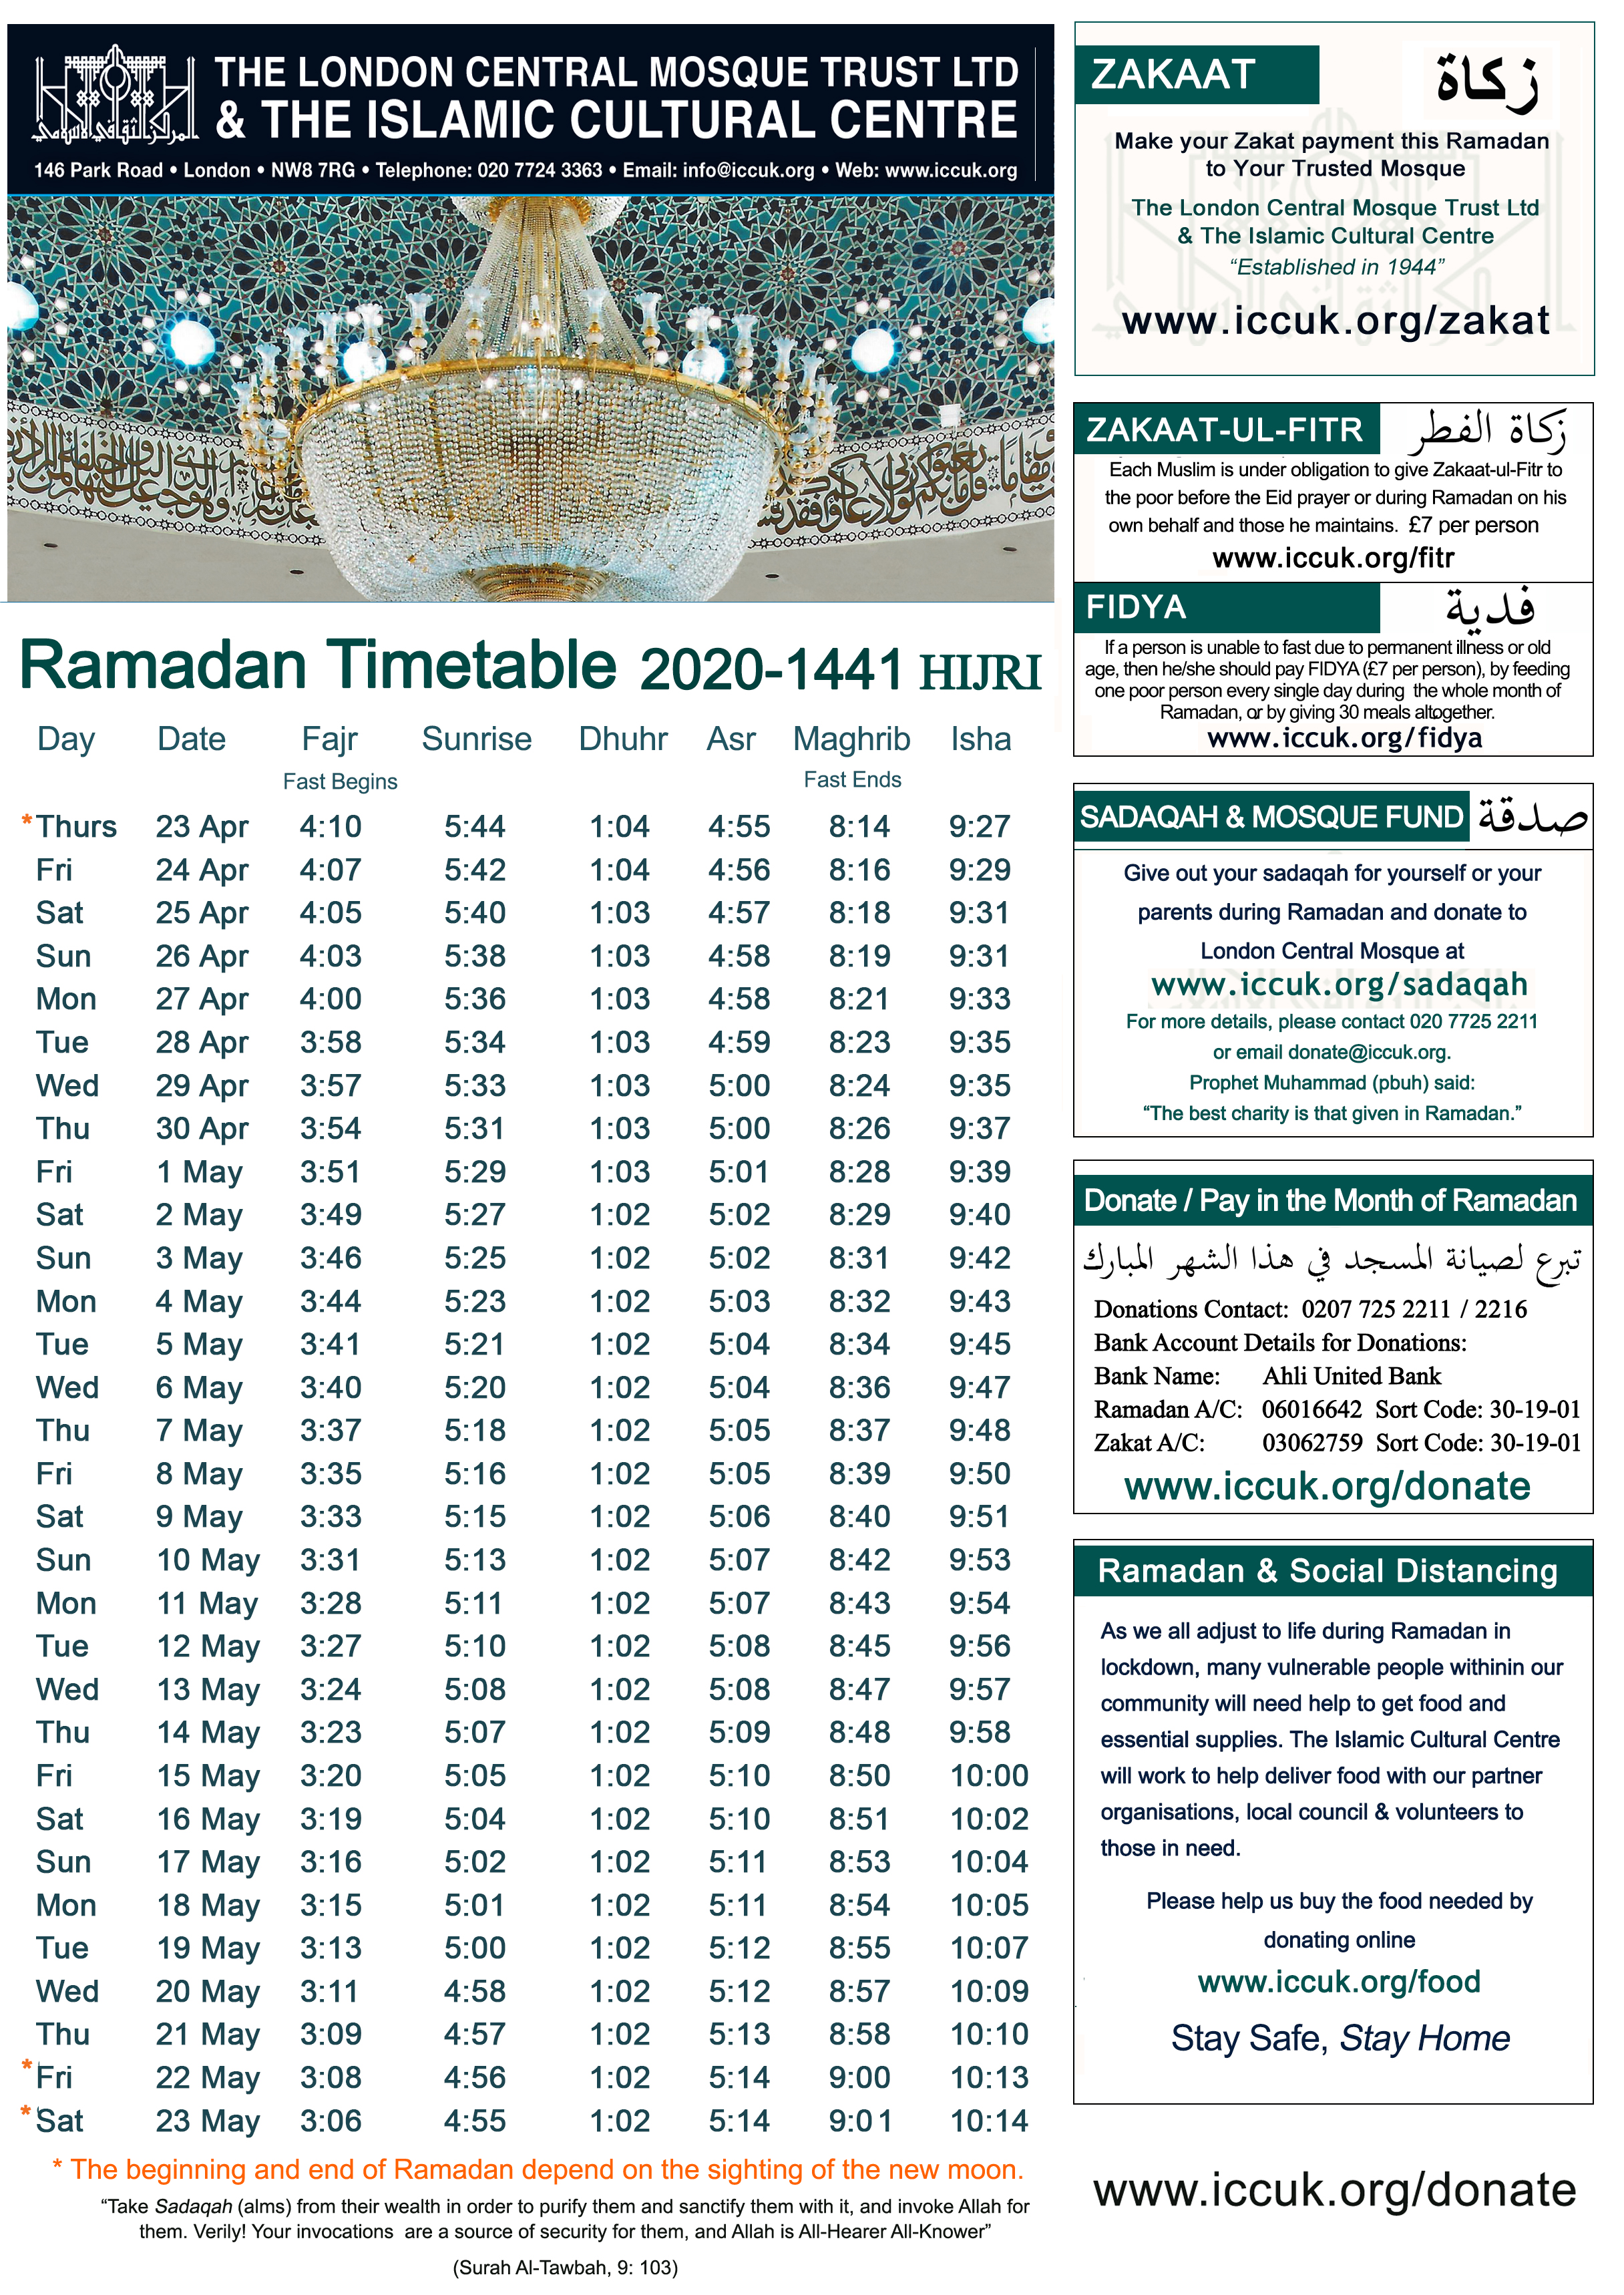 Ramadan 2021 Timetable Uk Ramadan 2020 Uk Timetable For Fasting And When Will It End